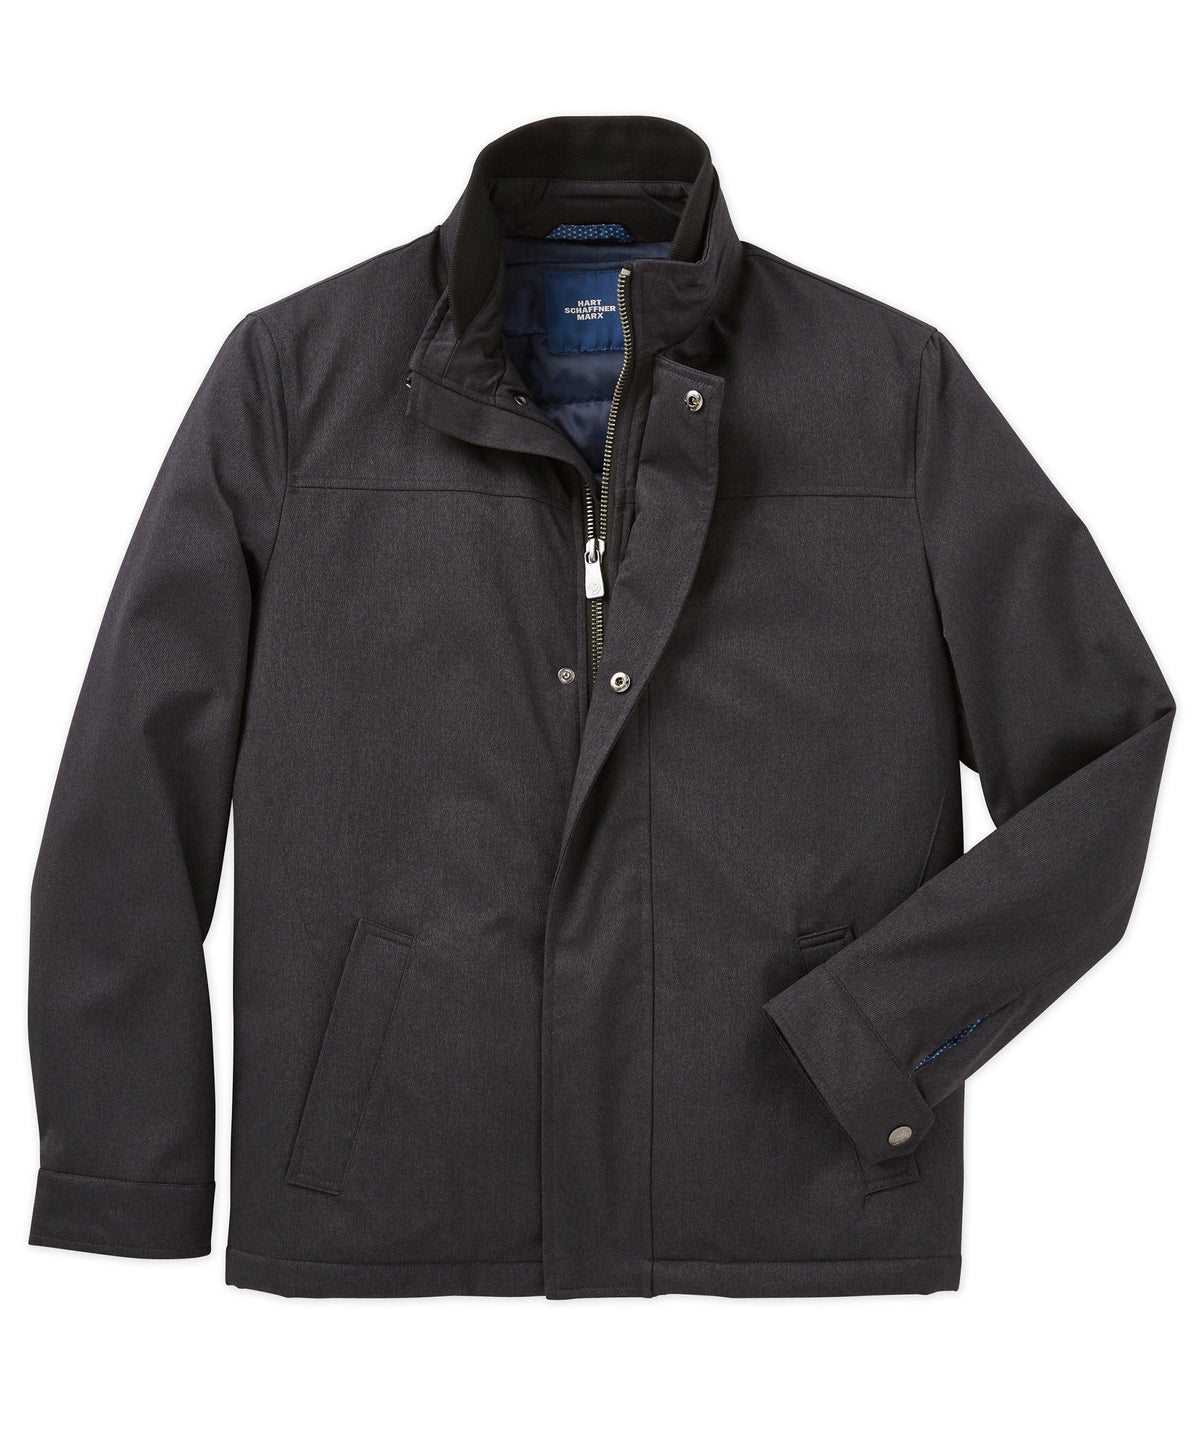 Stokes Zip-Front Jacket with Knit Collar